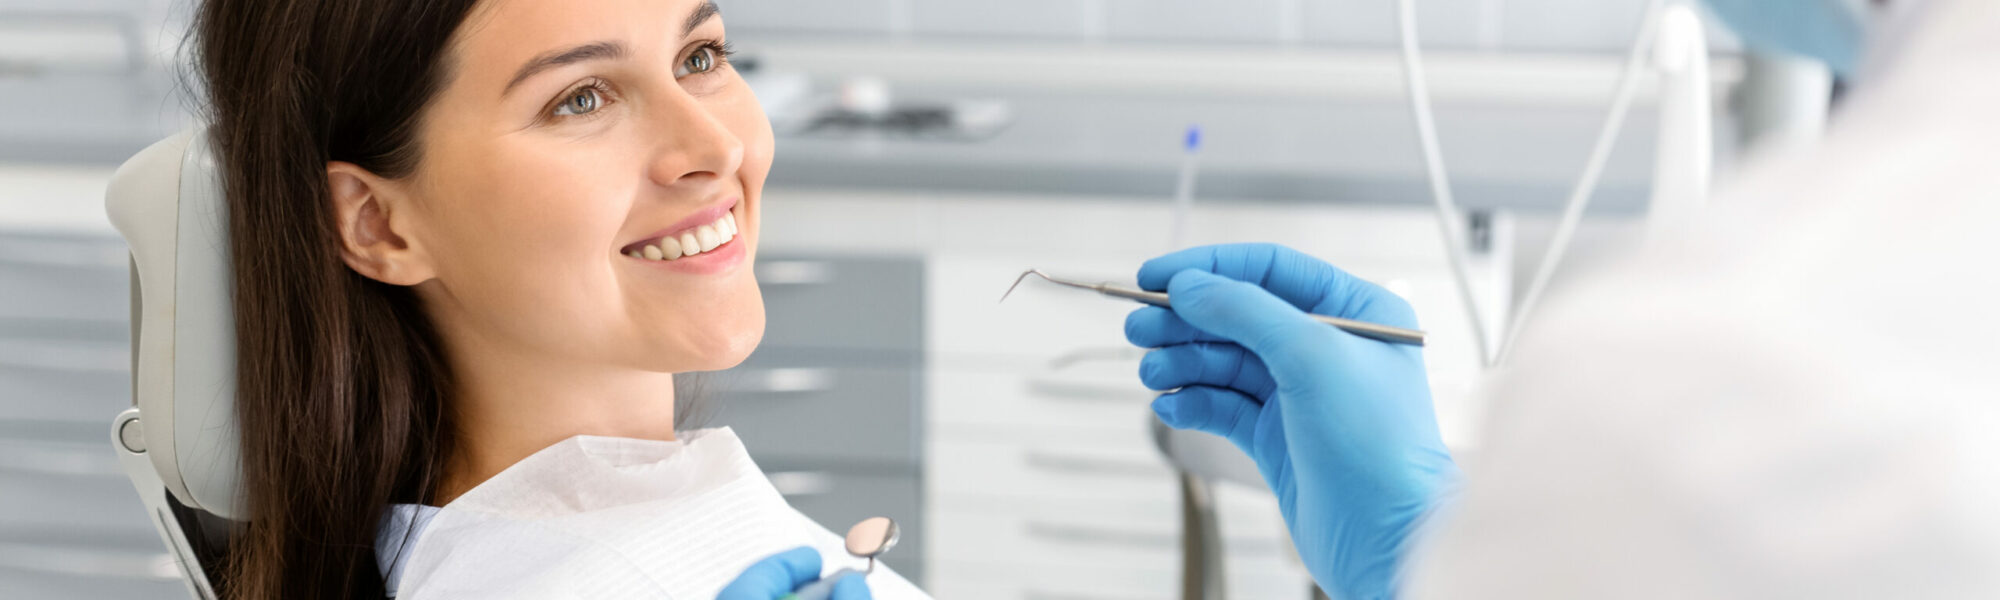 Smiling pretty woman looking at dentist with trust, doctor holding drilling tools, trust and care concept, side view